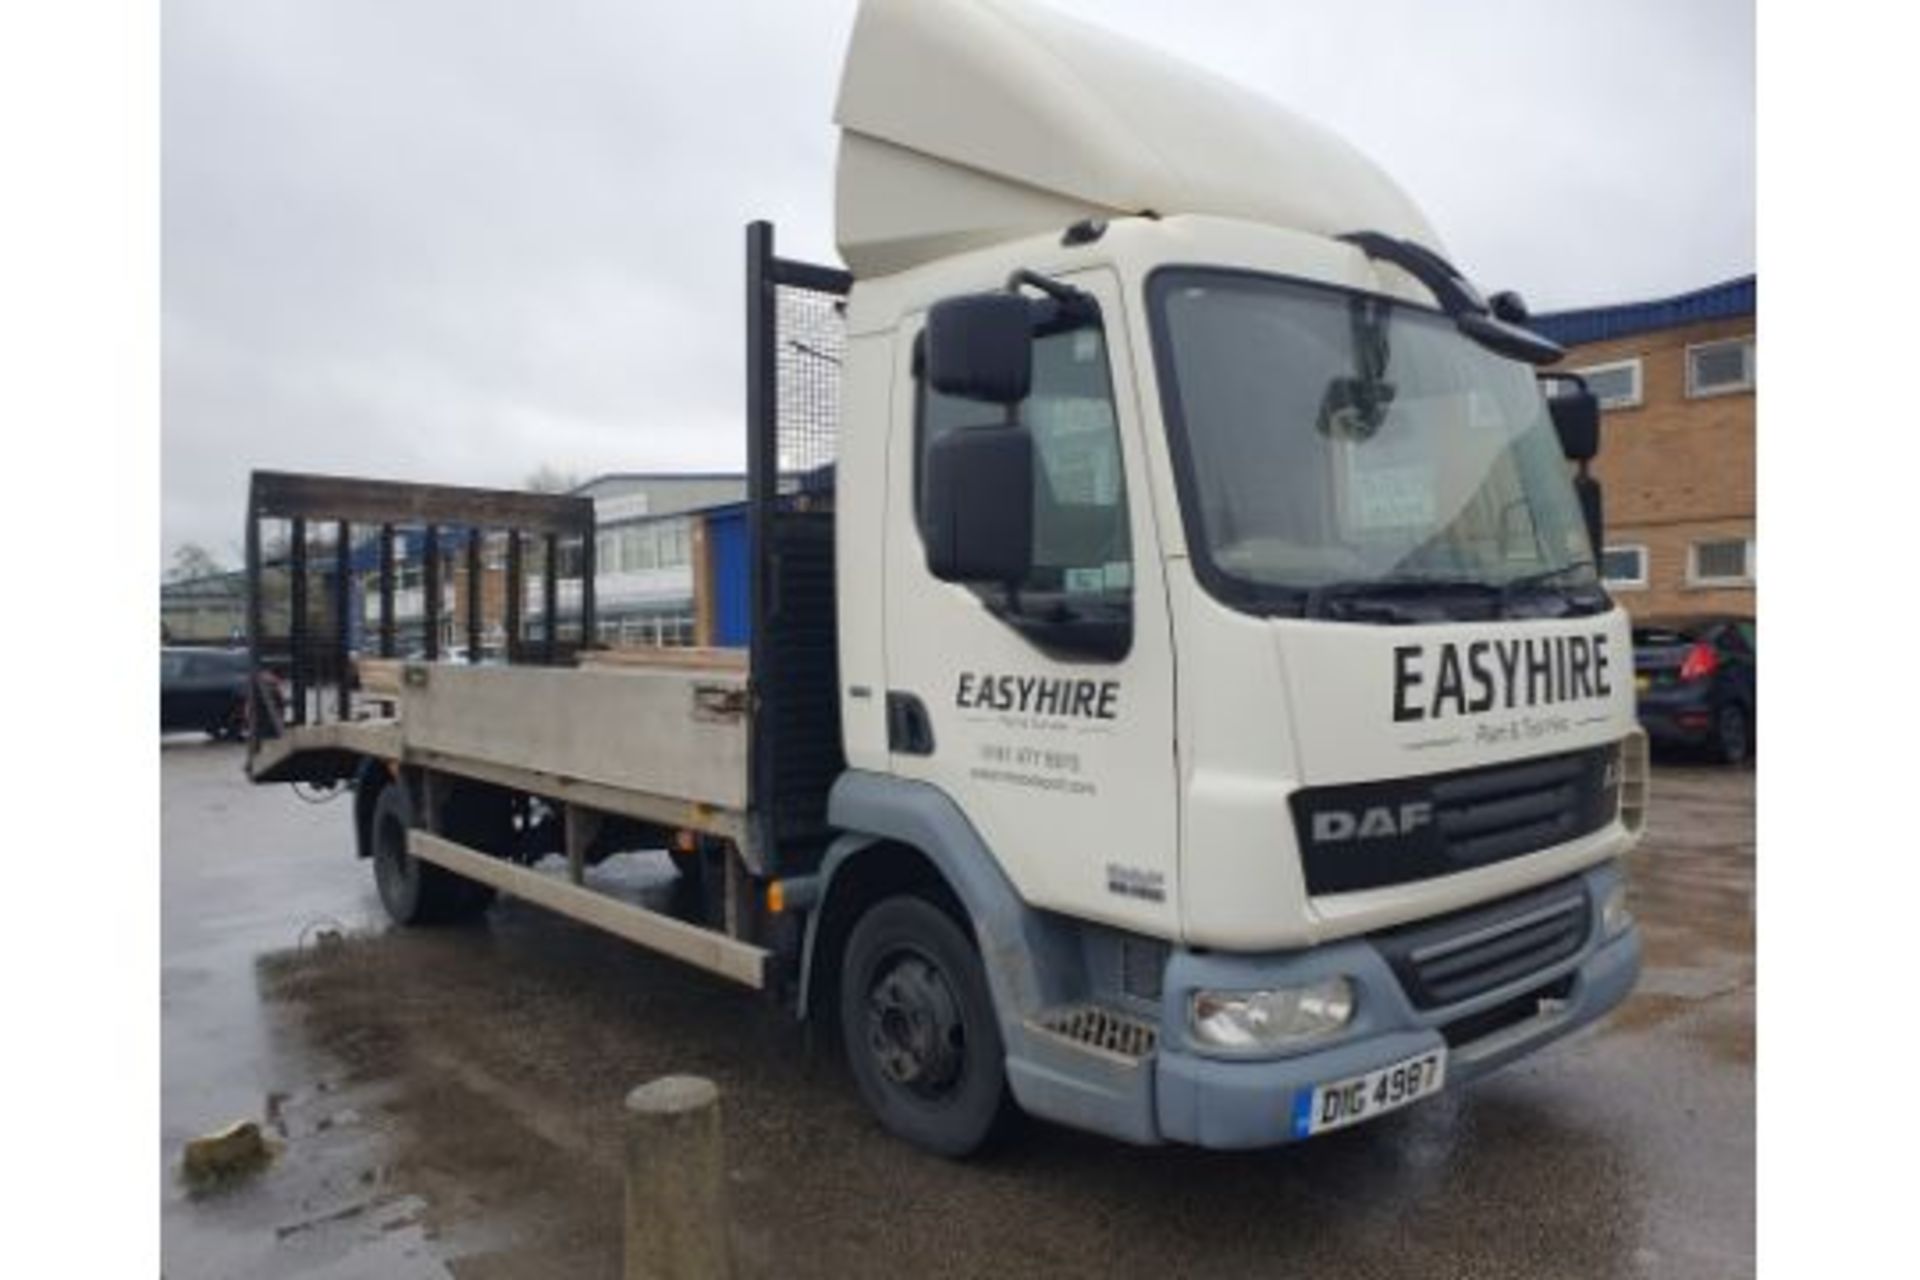 DAF LF 45.160 Flatbed Lorry w/ Loading Ramp & Electric Winch | DIG 4987 | 494,328km | *Non Runner*